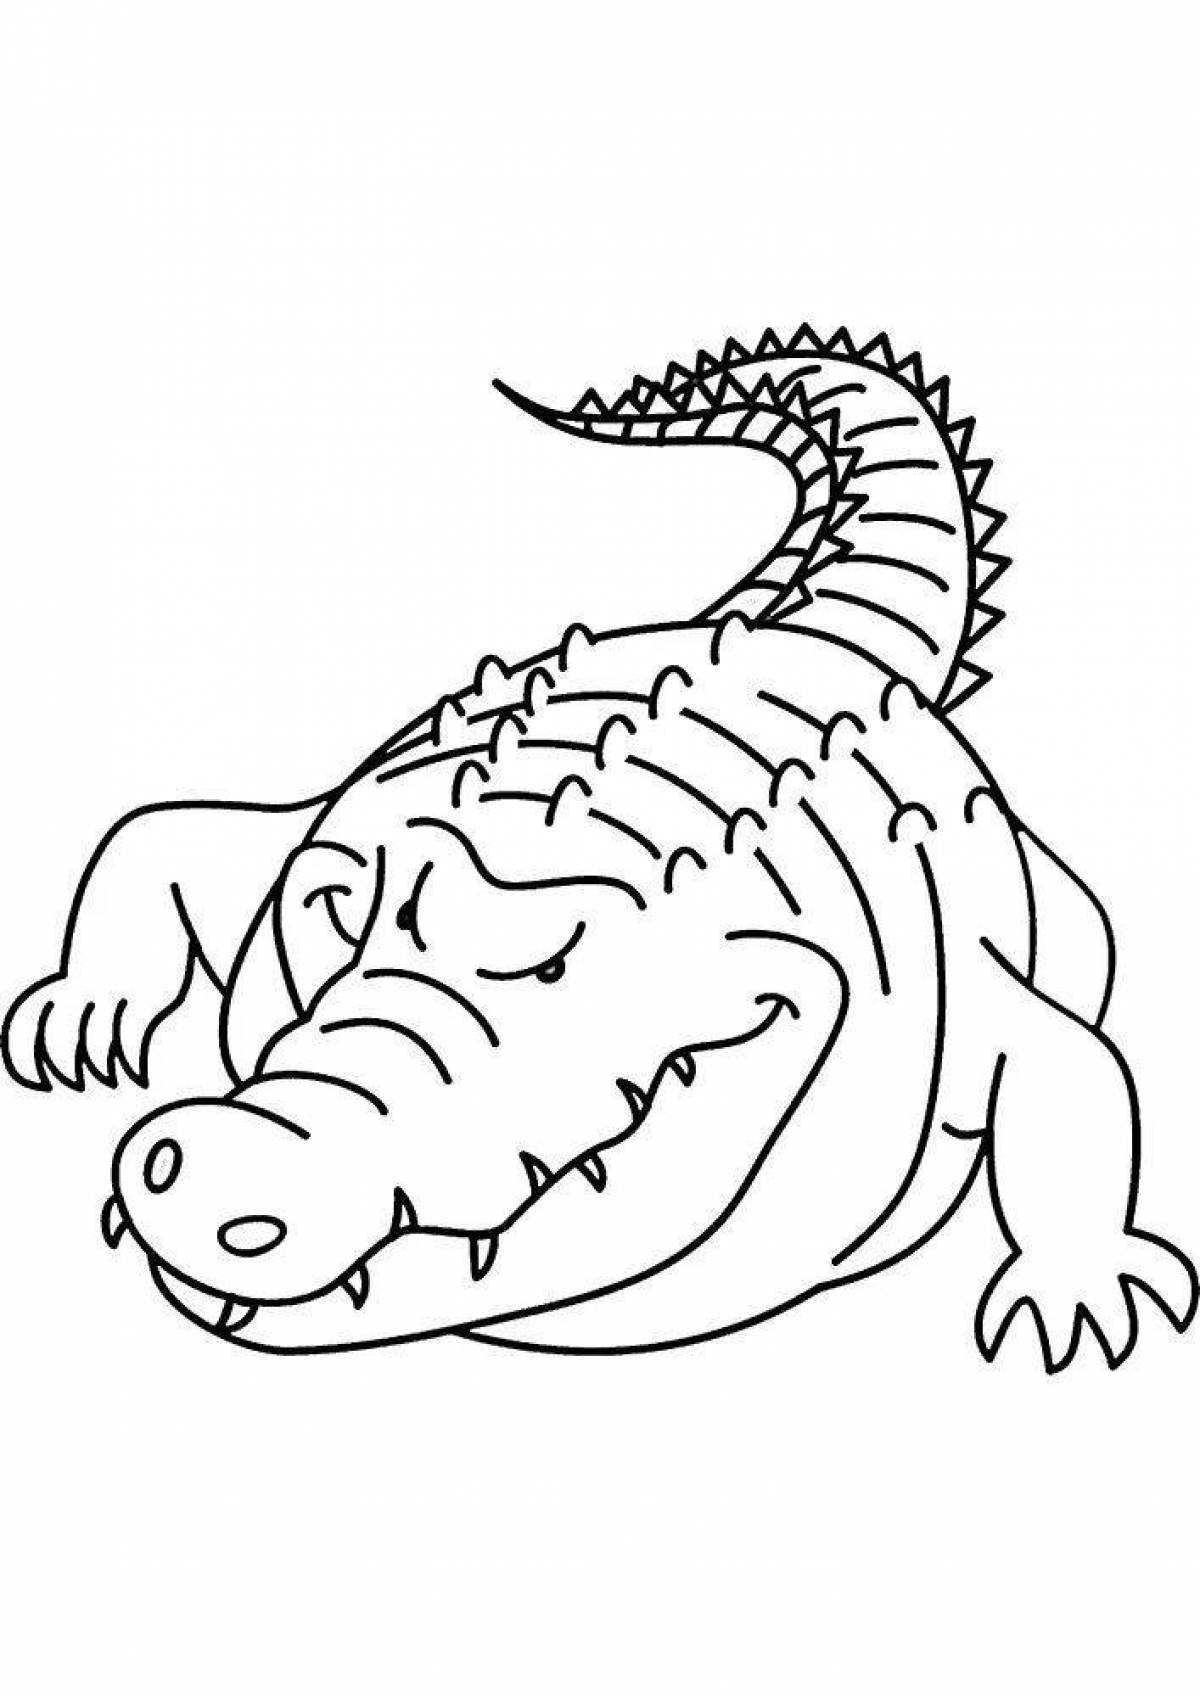 Fancy alligator coloring page